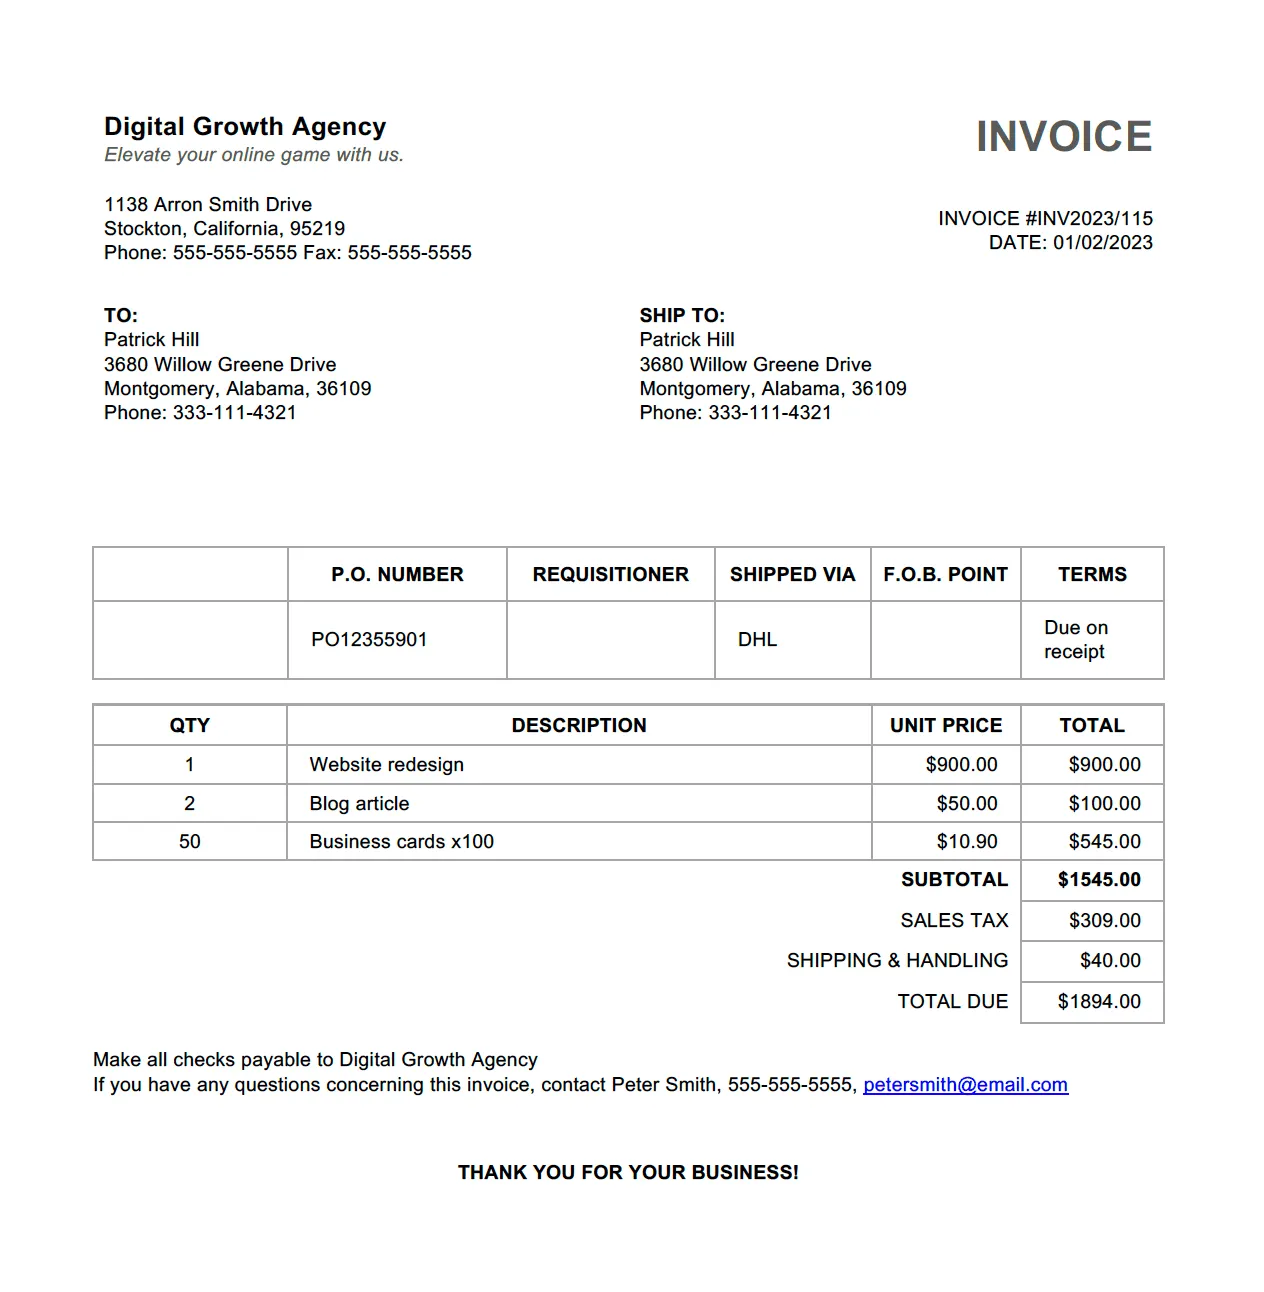 The image displays a PDF invoice that is about to be imported into Airparser for parsing